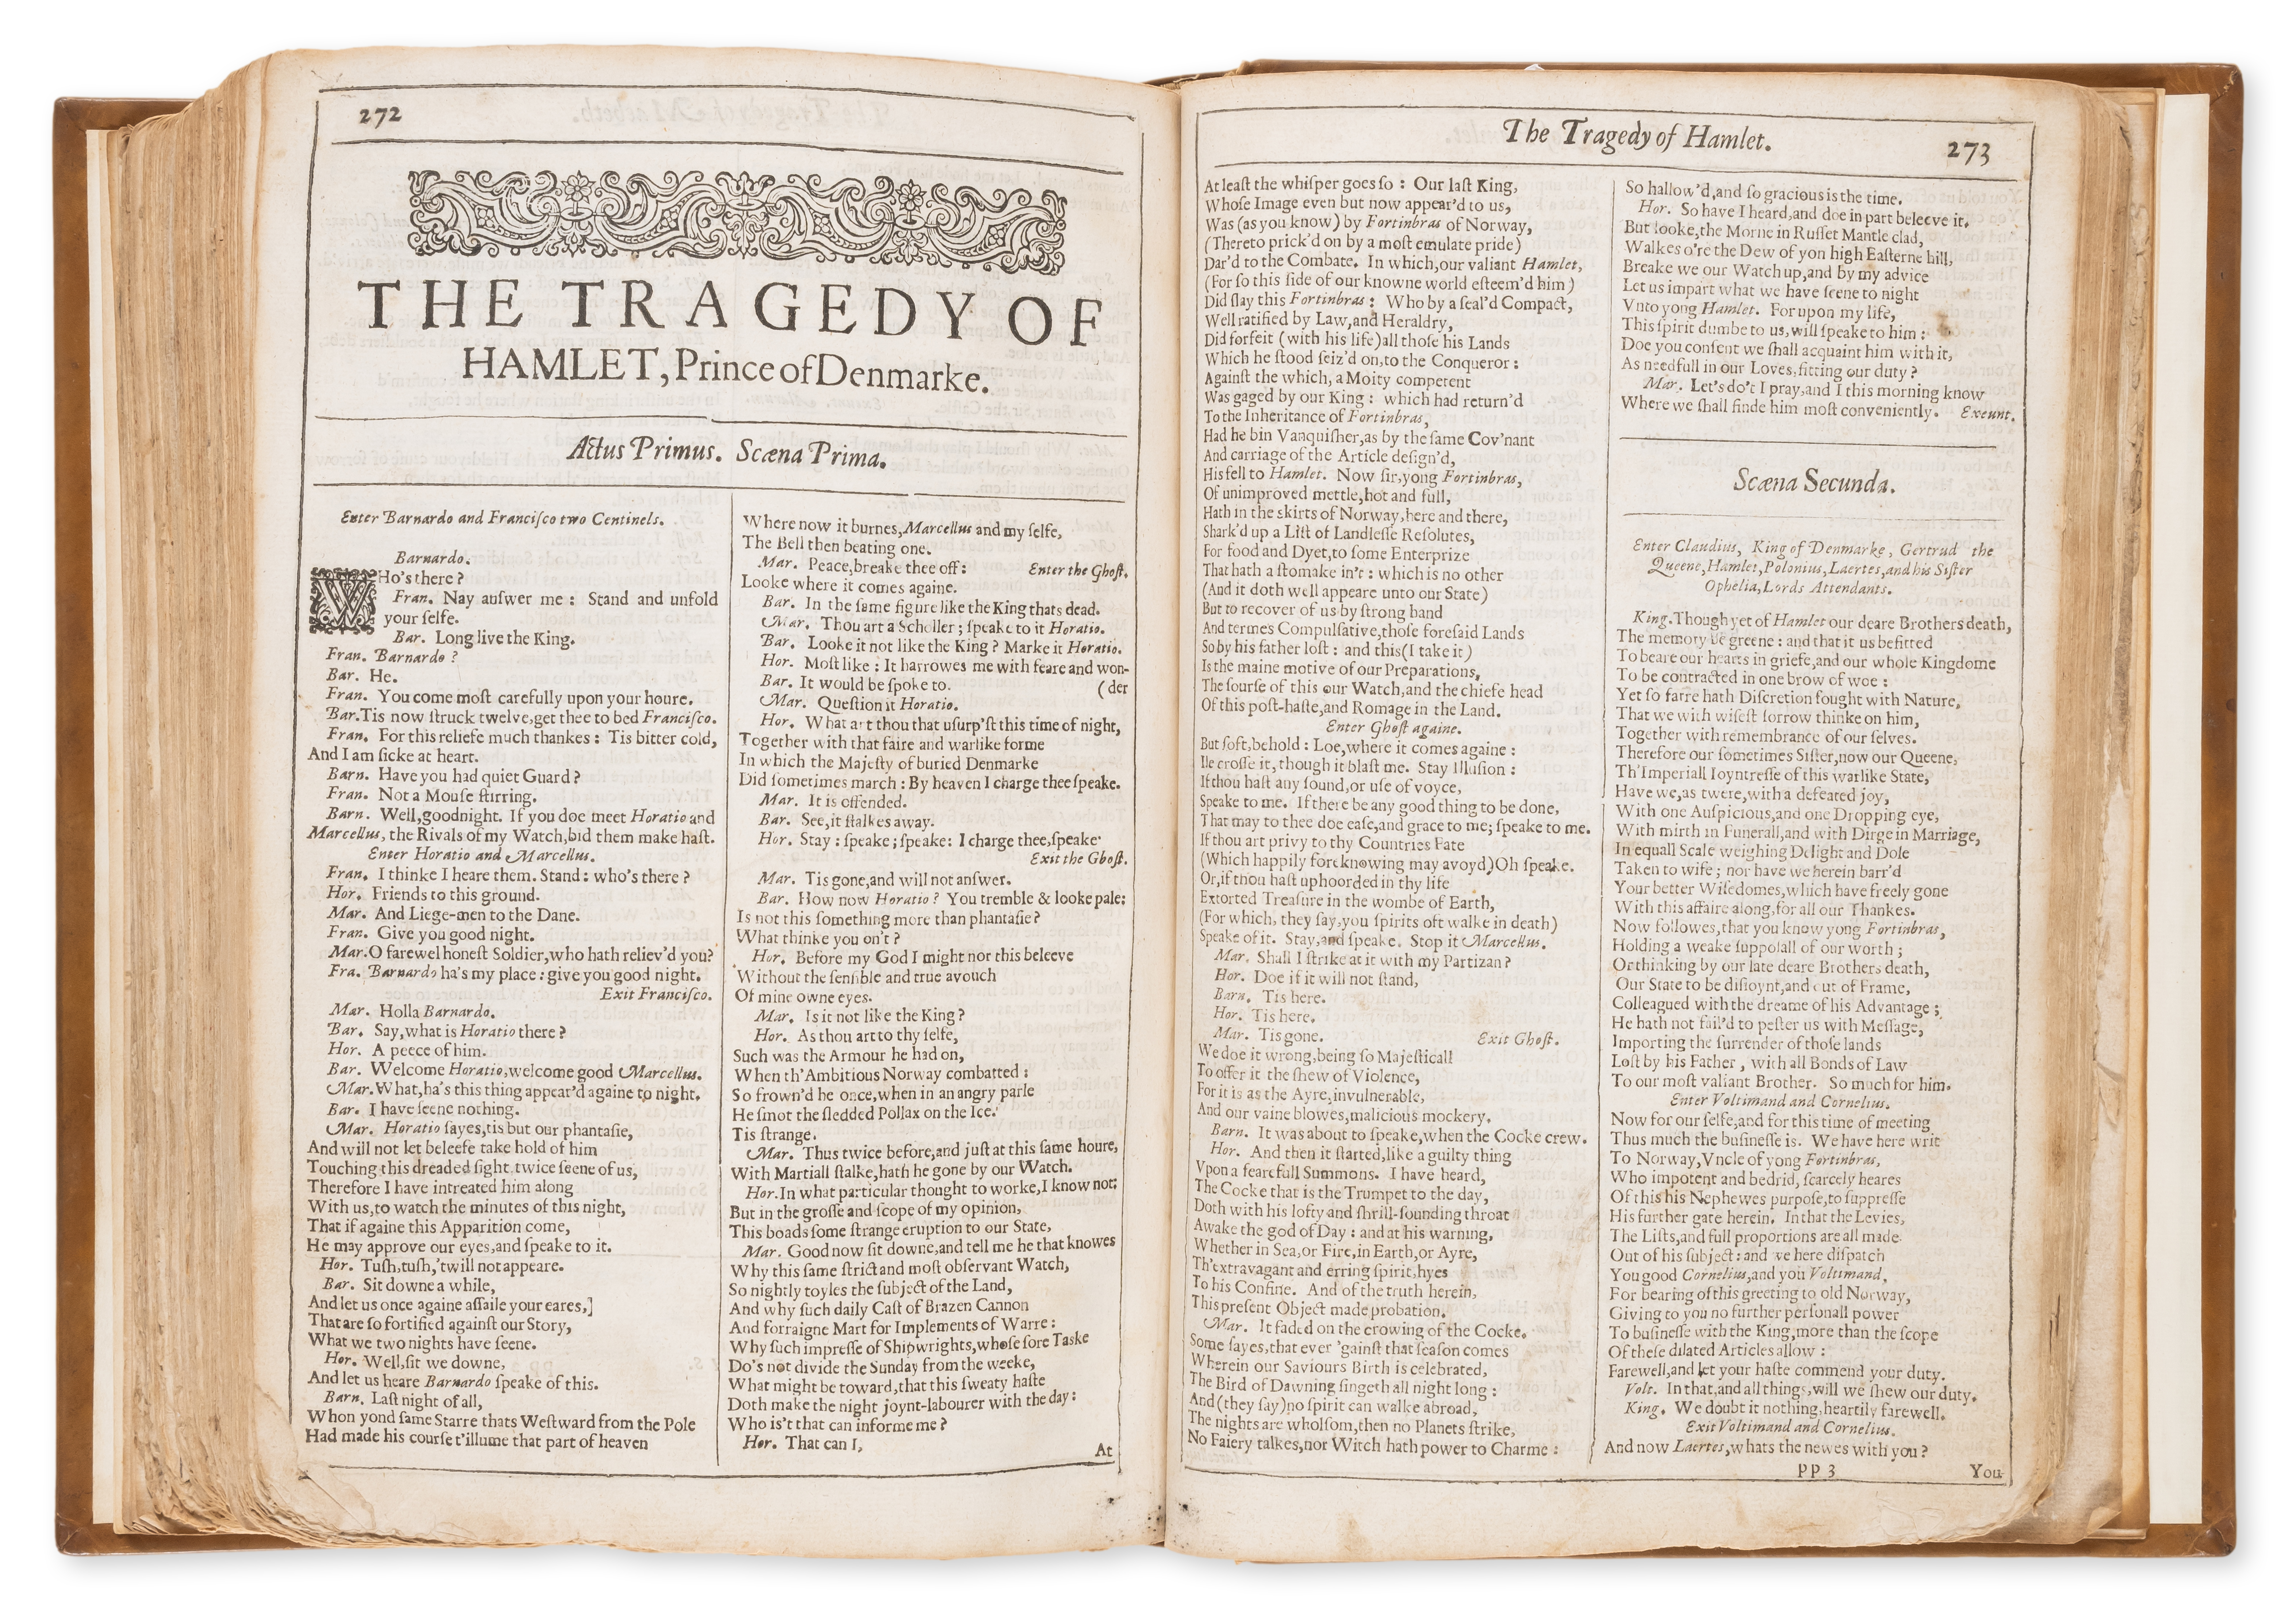 [Shakespeare (William)] [Comedies, Histories, and Tragedies], second folio edition, [by Tho.Cotes... - Image 3 of 5